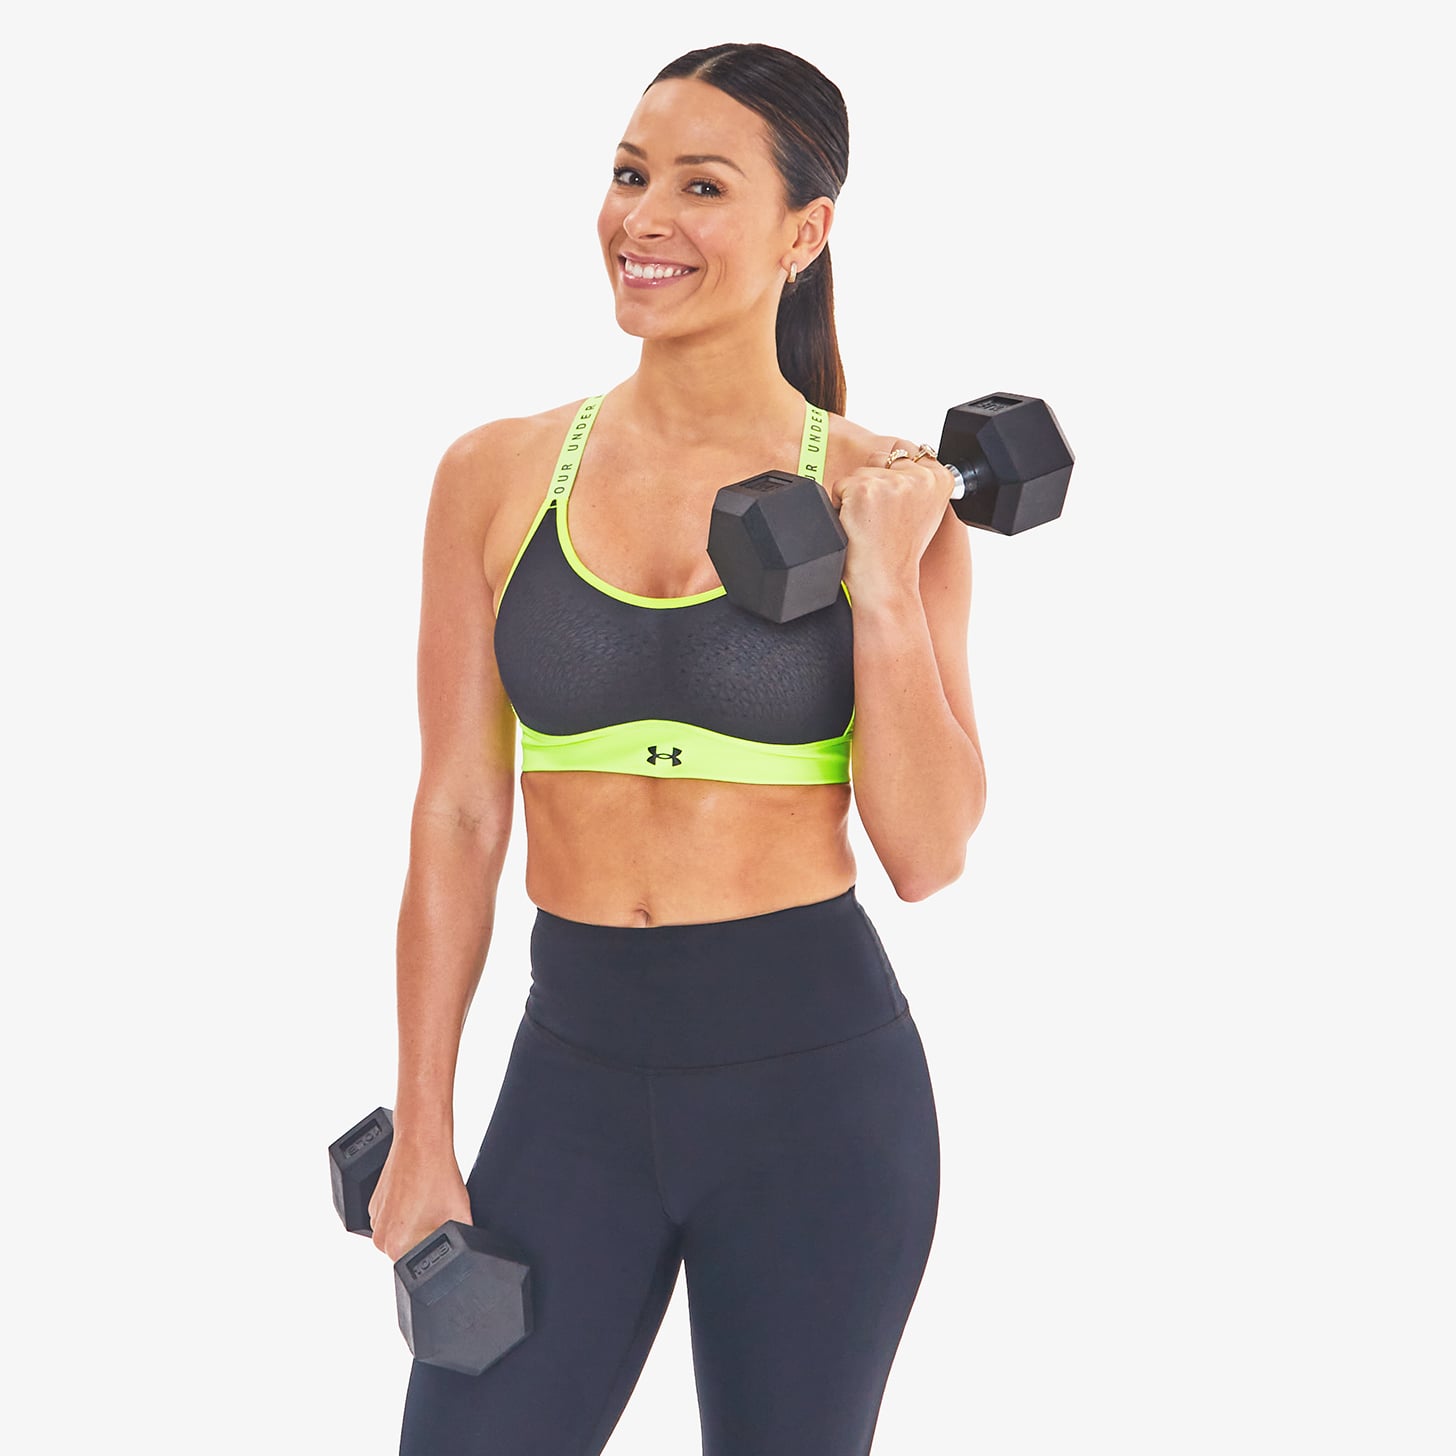 This upper-body dumbbell workout sculpts your shoulders, biceps